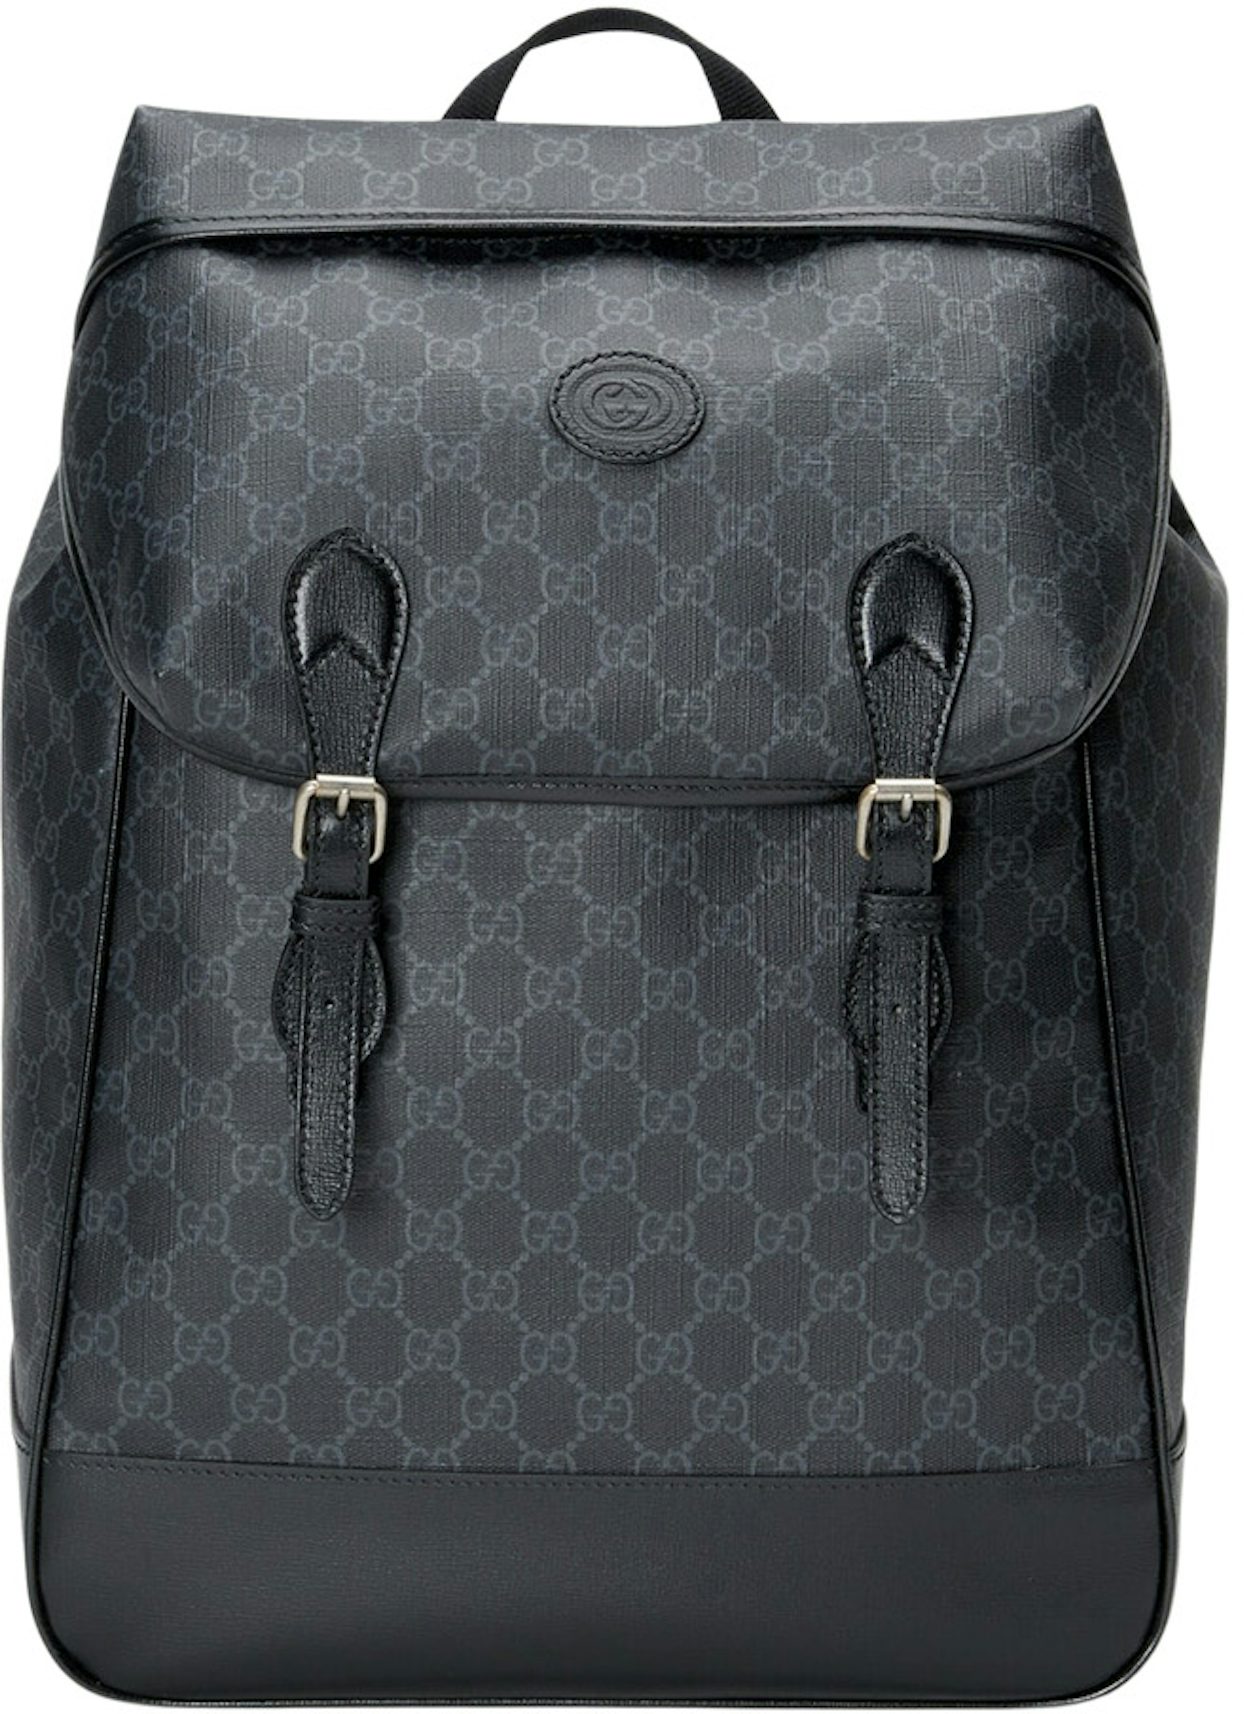 Gucci Bestiary Backpack GG Supreme Tigers Black/Grey for Men